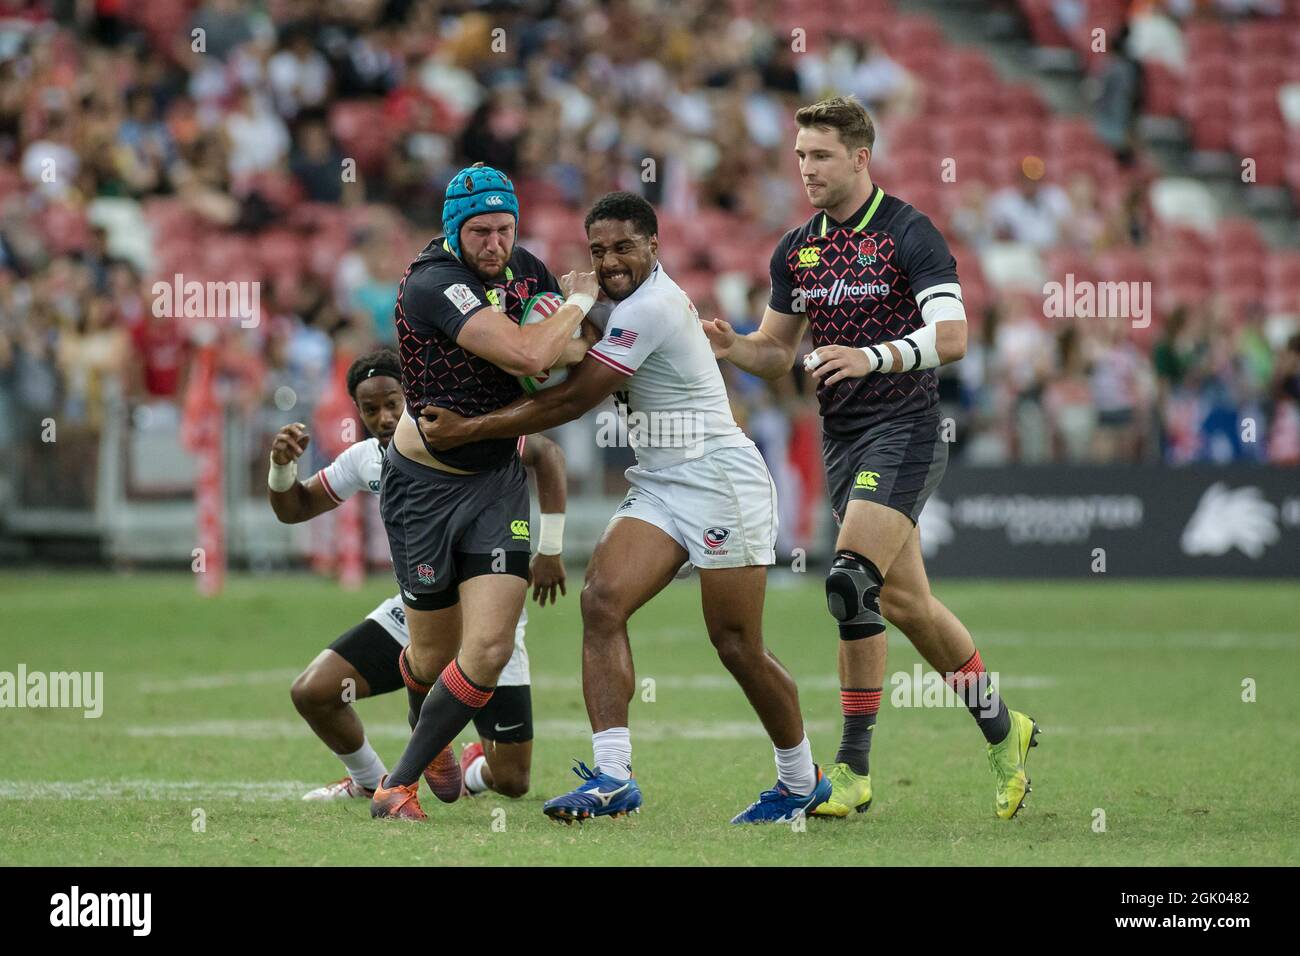 SINGAPORE-APRIL 14:England 7s Team (blue) plays against USA 7s team (white) during the Bronze medal match of HSBC World Rugby Singapore Sevens on April 14, 2019 at National Stadium in Singapore Stock Photo